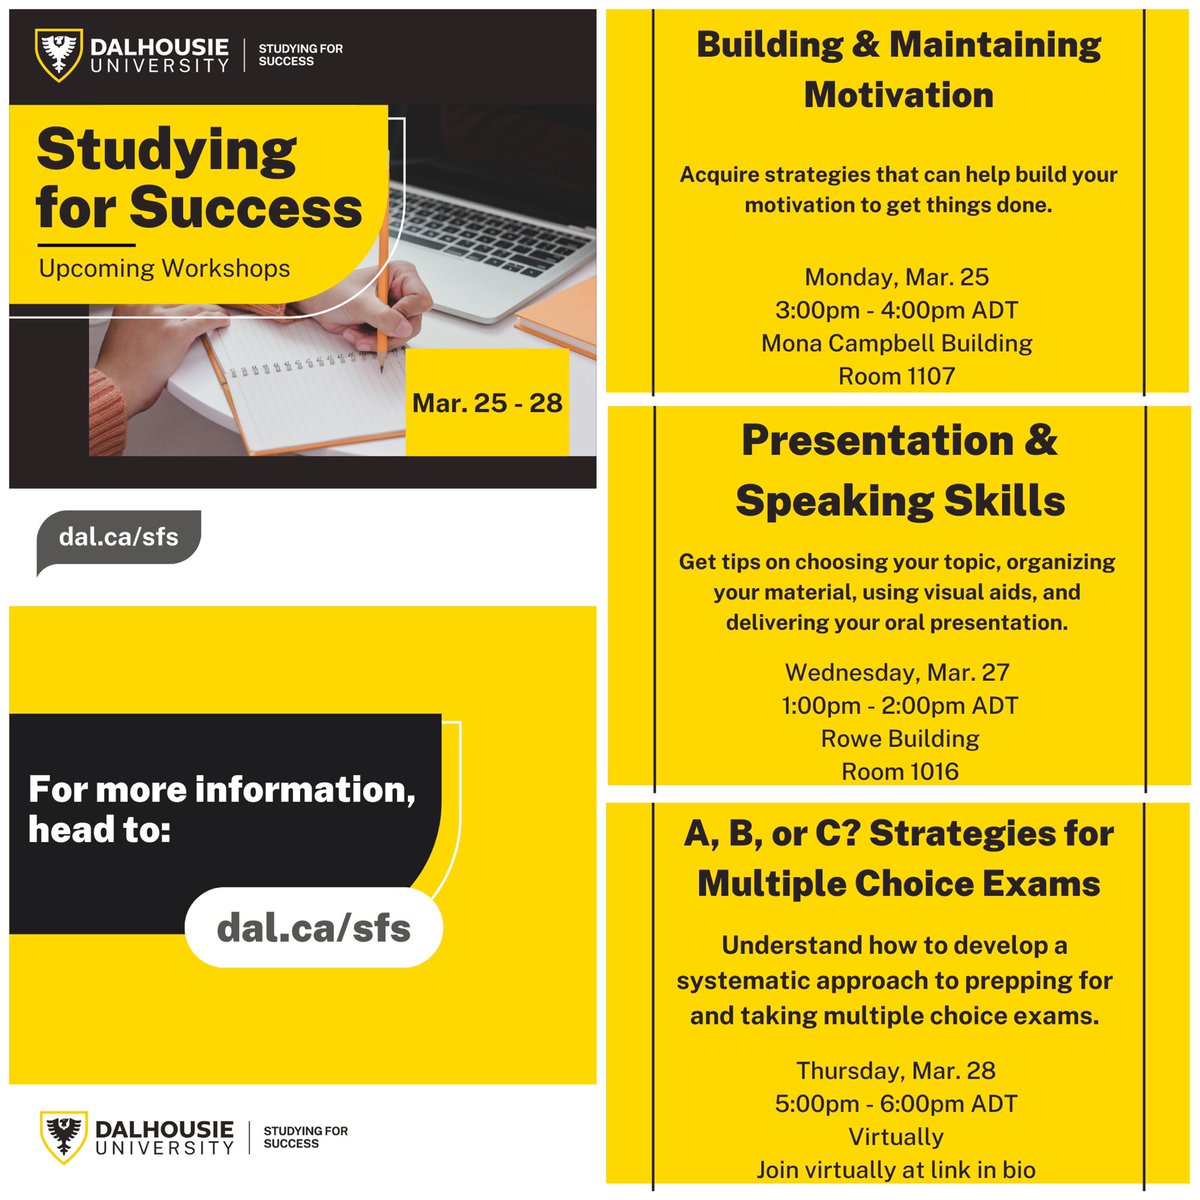 Got lots of schoolwork to do? Need some motivation? Want to learn to study smarter? Then let us help you learn how to learn. #StudentSupport #StudentSuccess #DalhousieU #DalhousieUniversity #DalStudentLife #StudentLife #DalStudentSuccess #StudySmarter #DalhousieStudying